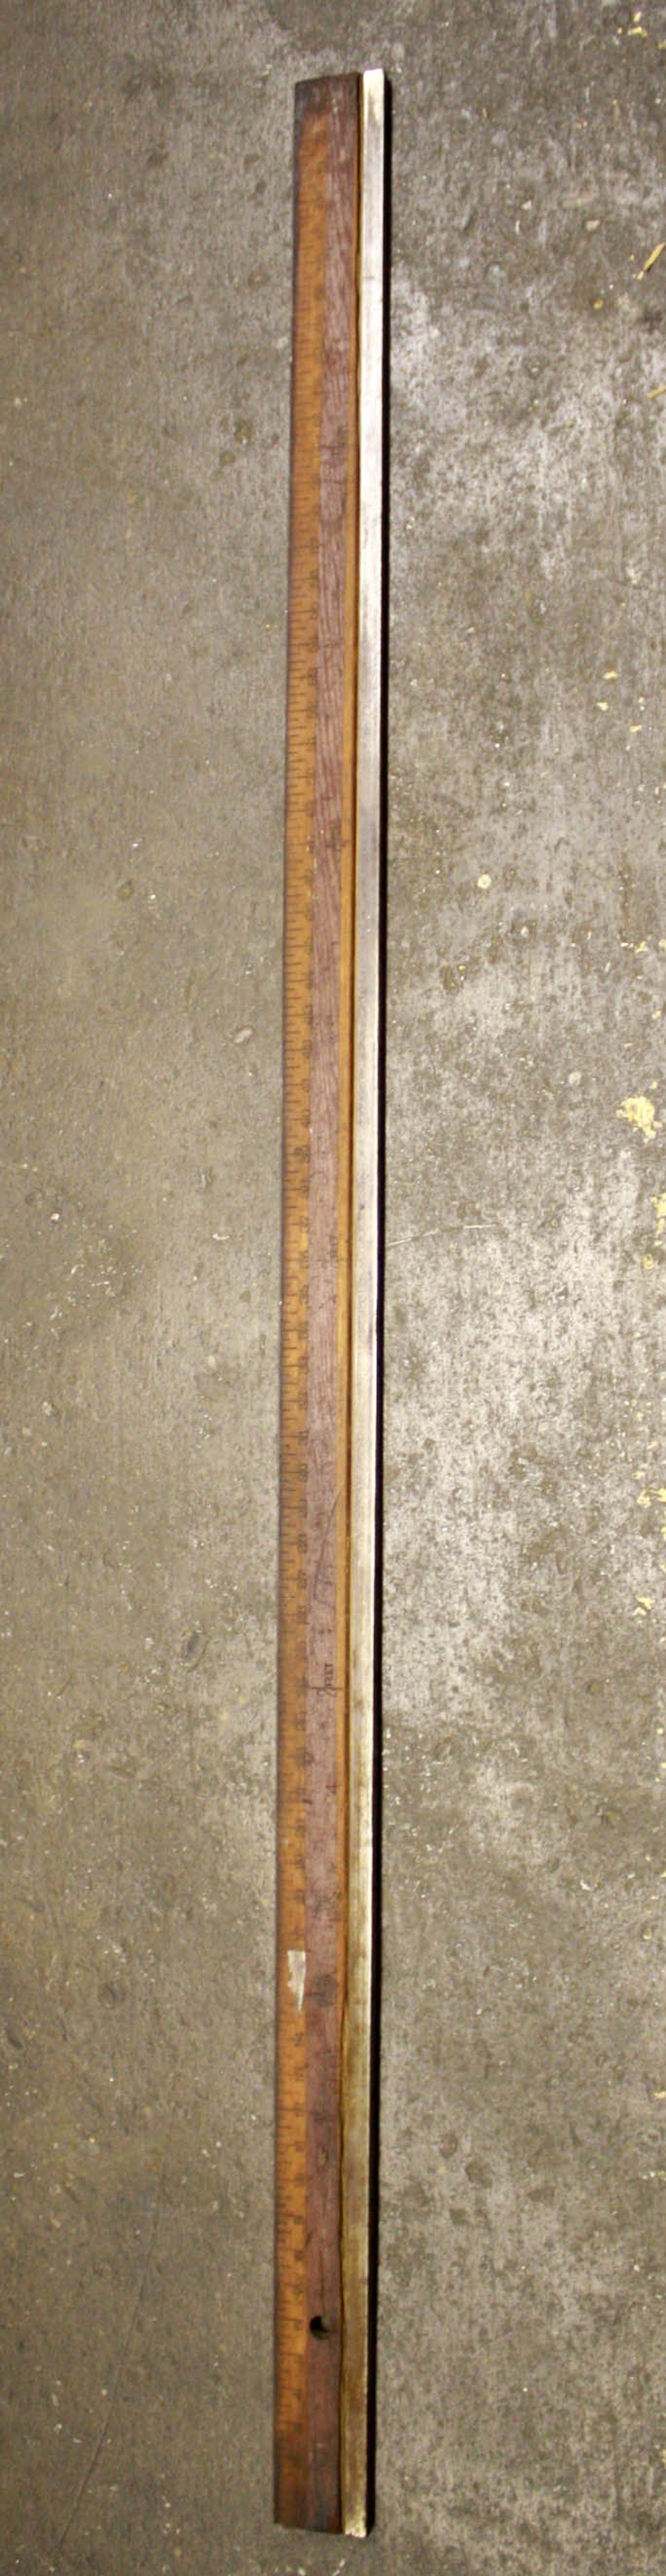 VINTAGE FALCON 15 INCH WOOD RULER. AUBURN MAINE,MADE IN USA. MISSING METAL  EDGE